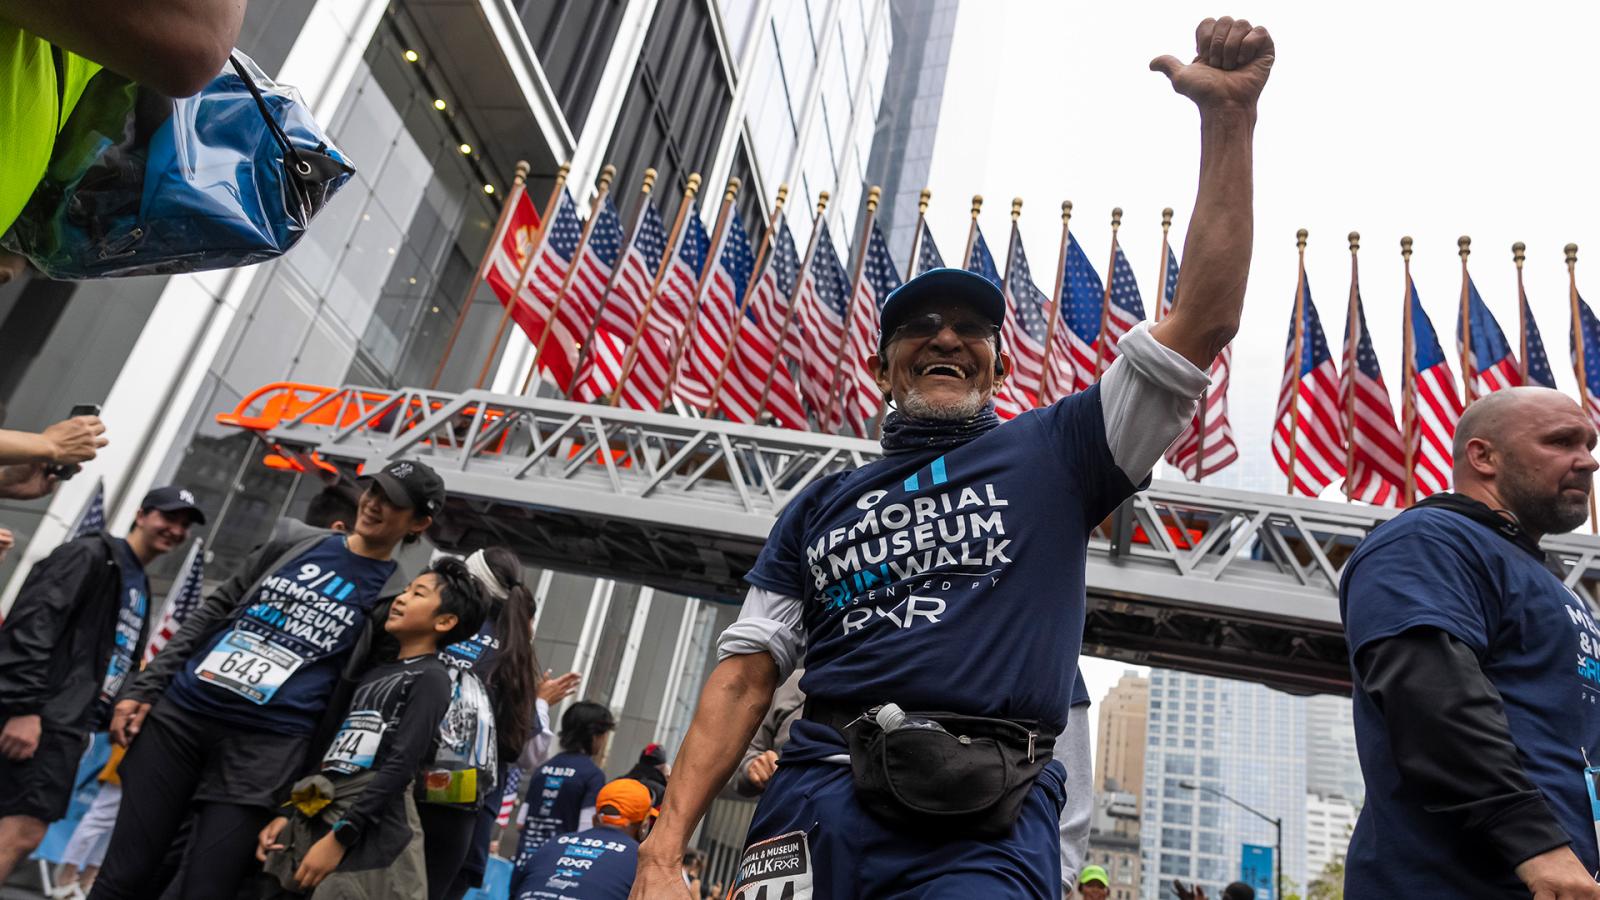 A person wearing navy blue shorts and a navy blue 5K t-shirt crosses the finish line, left arm raised in victory